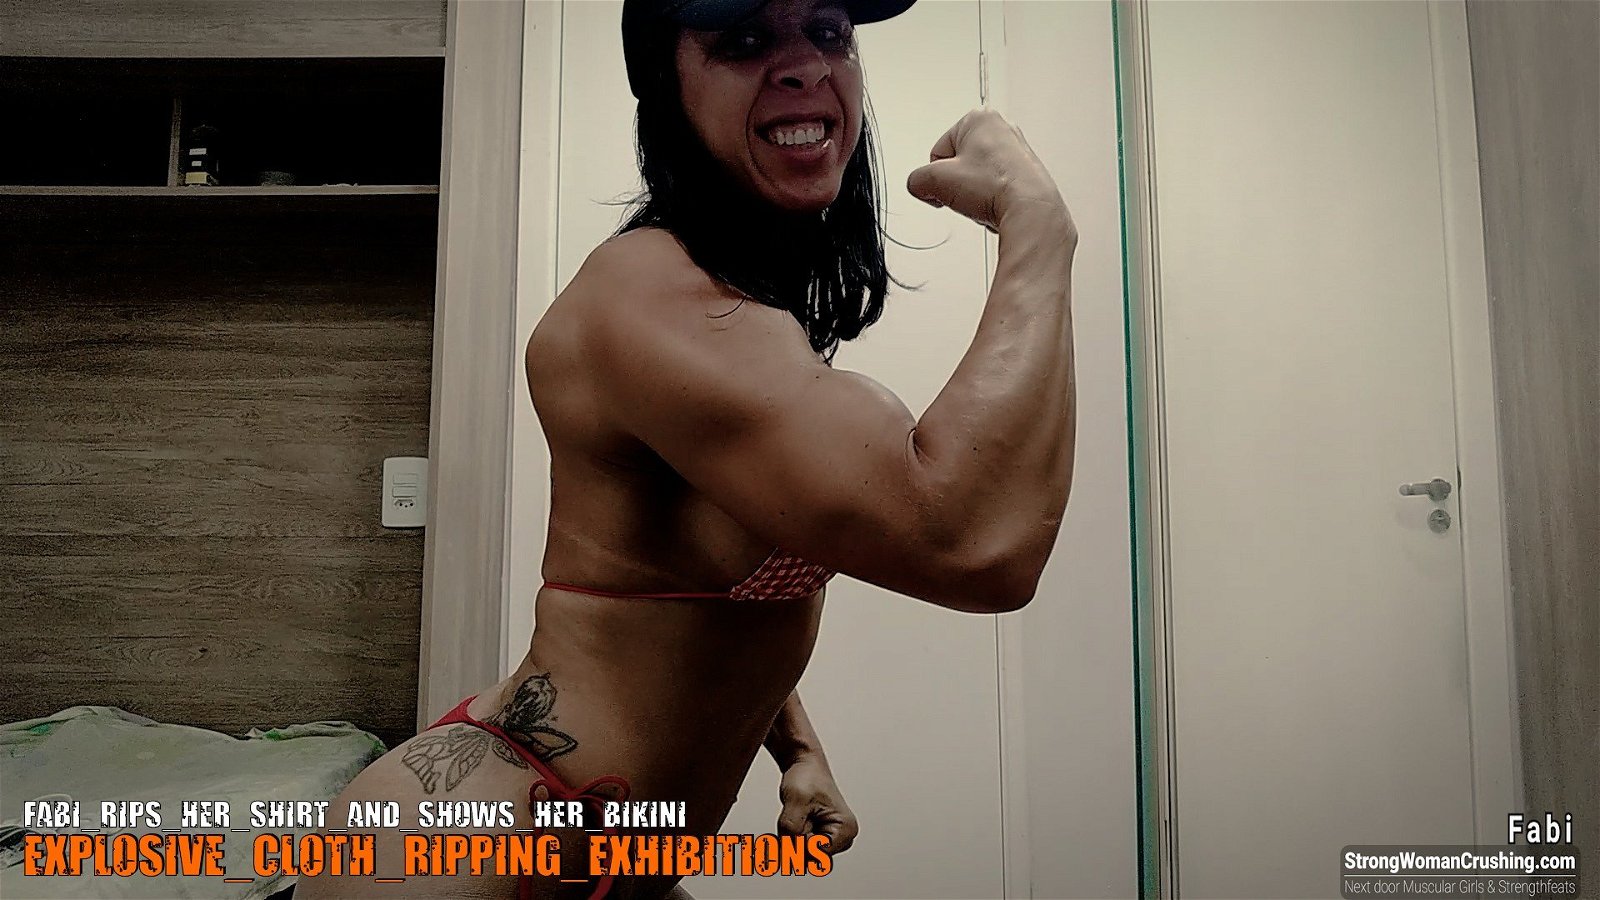 Photo by MusclegirlStrength with the username @MusclegirlStrength, who is a brand user,  September 11, 2023 at 12:47 AM and the text says '🔥🔥🔥 Check out Fabi's jaw-dropping video where she rips her shirt and shows her bikini! 🔥🔥🔥 Visit www.strongwomancrushing.com to get a membership and watch it now! #Fabi #StrongWomanCrushing #Bikini #Rip #Video'